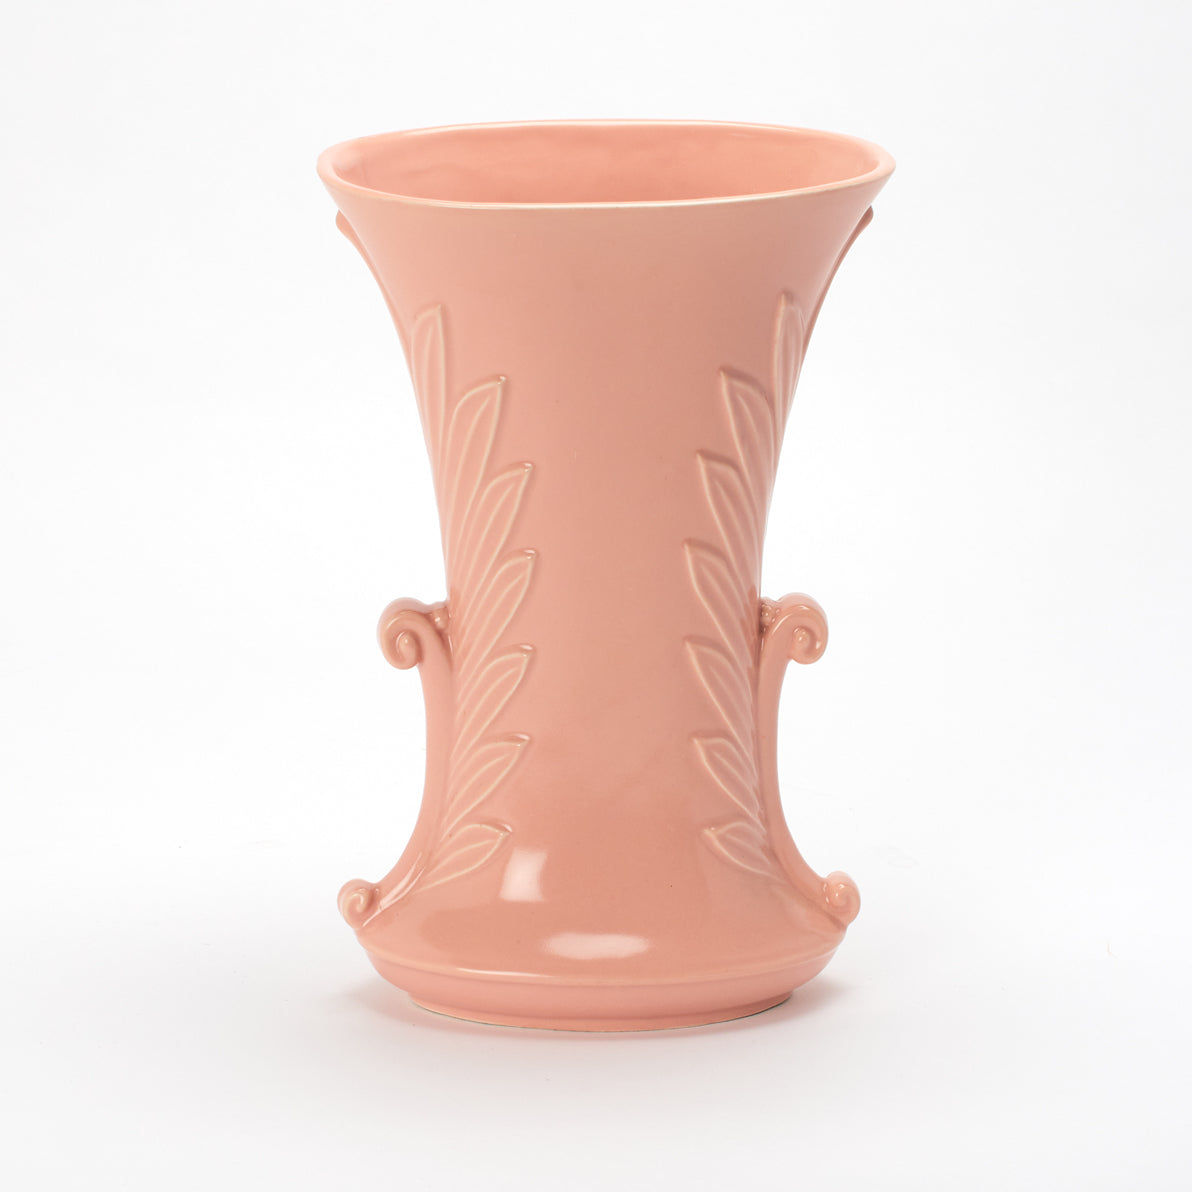 LEAFY ART DECO STYLE PINK CERAMIC ABINGDON VASE, 1950s (sold out)